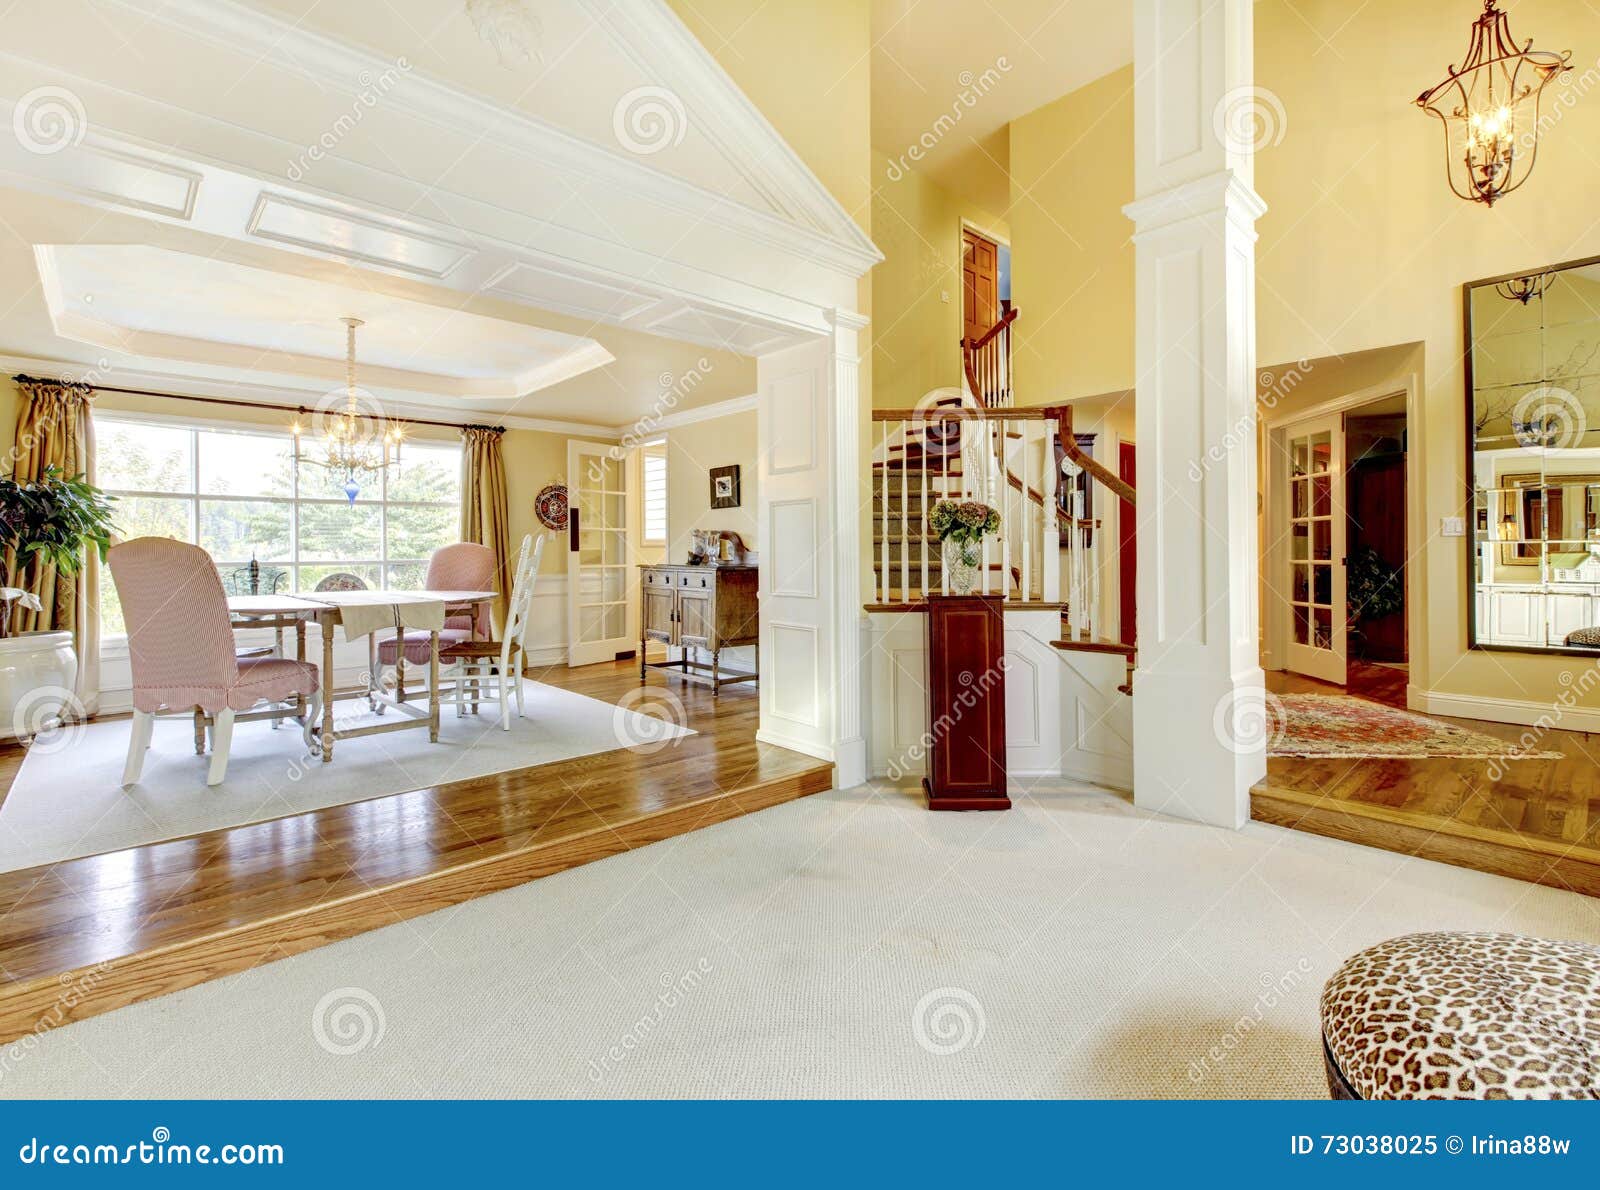 Luxury Home Well Decorated Golden Living Room With Beige Carpet